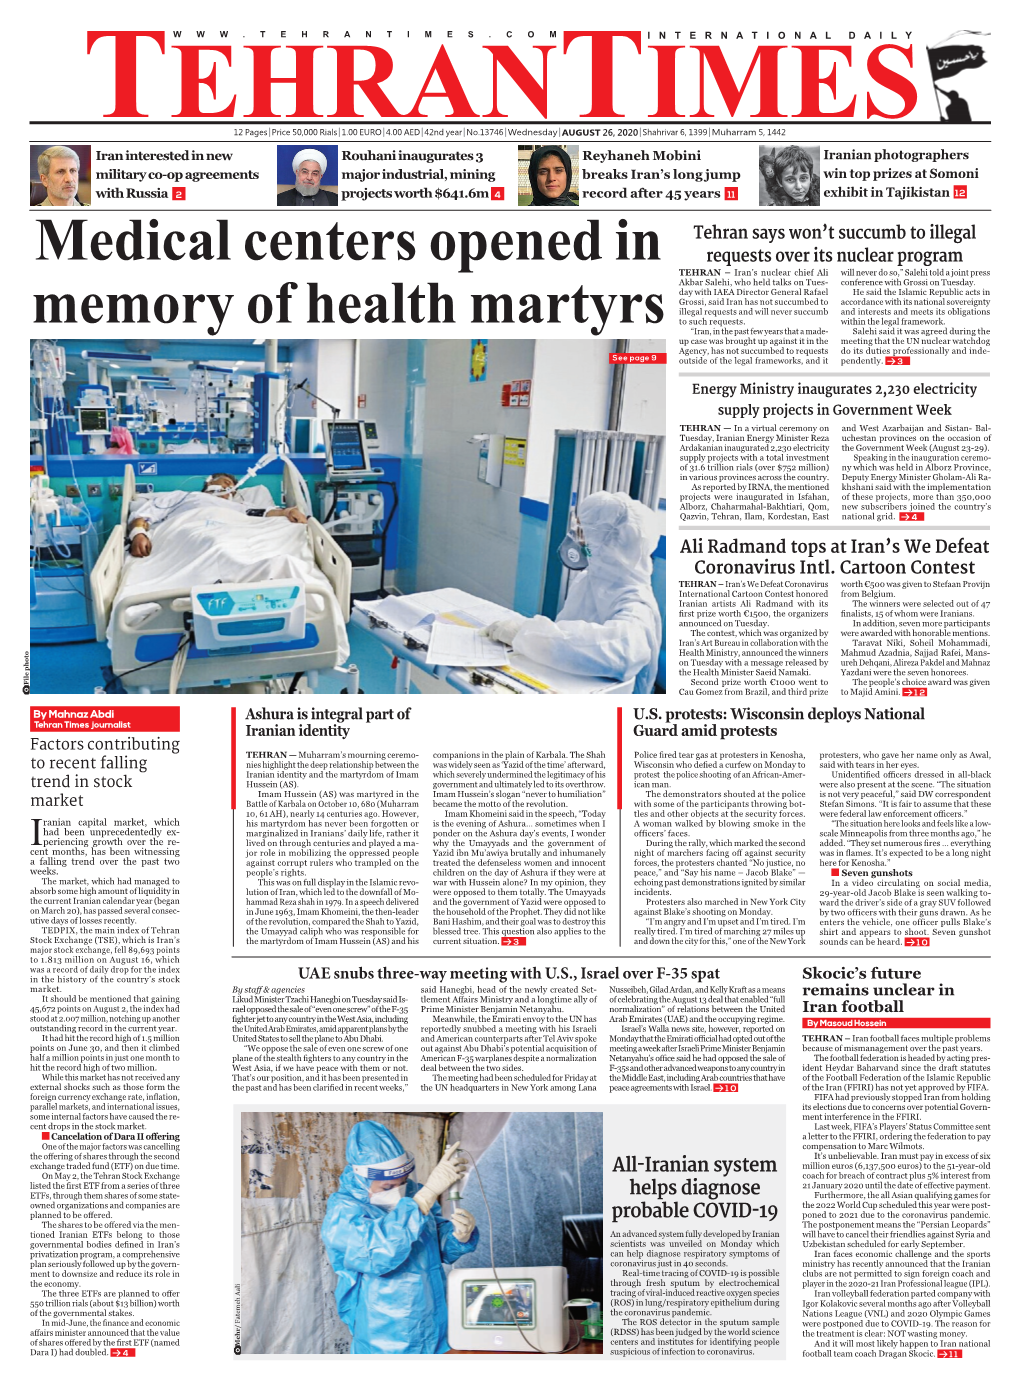 Medical Centers Opened in Memory of Health Martyrs